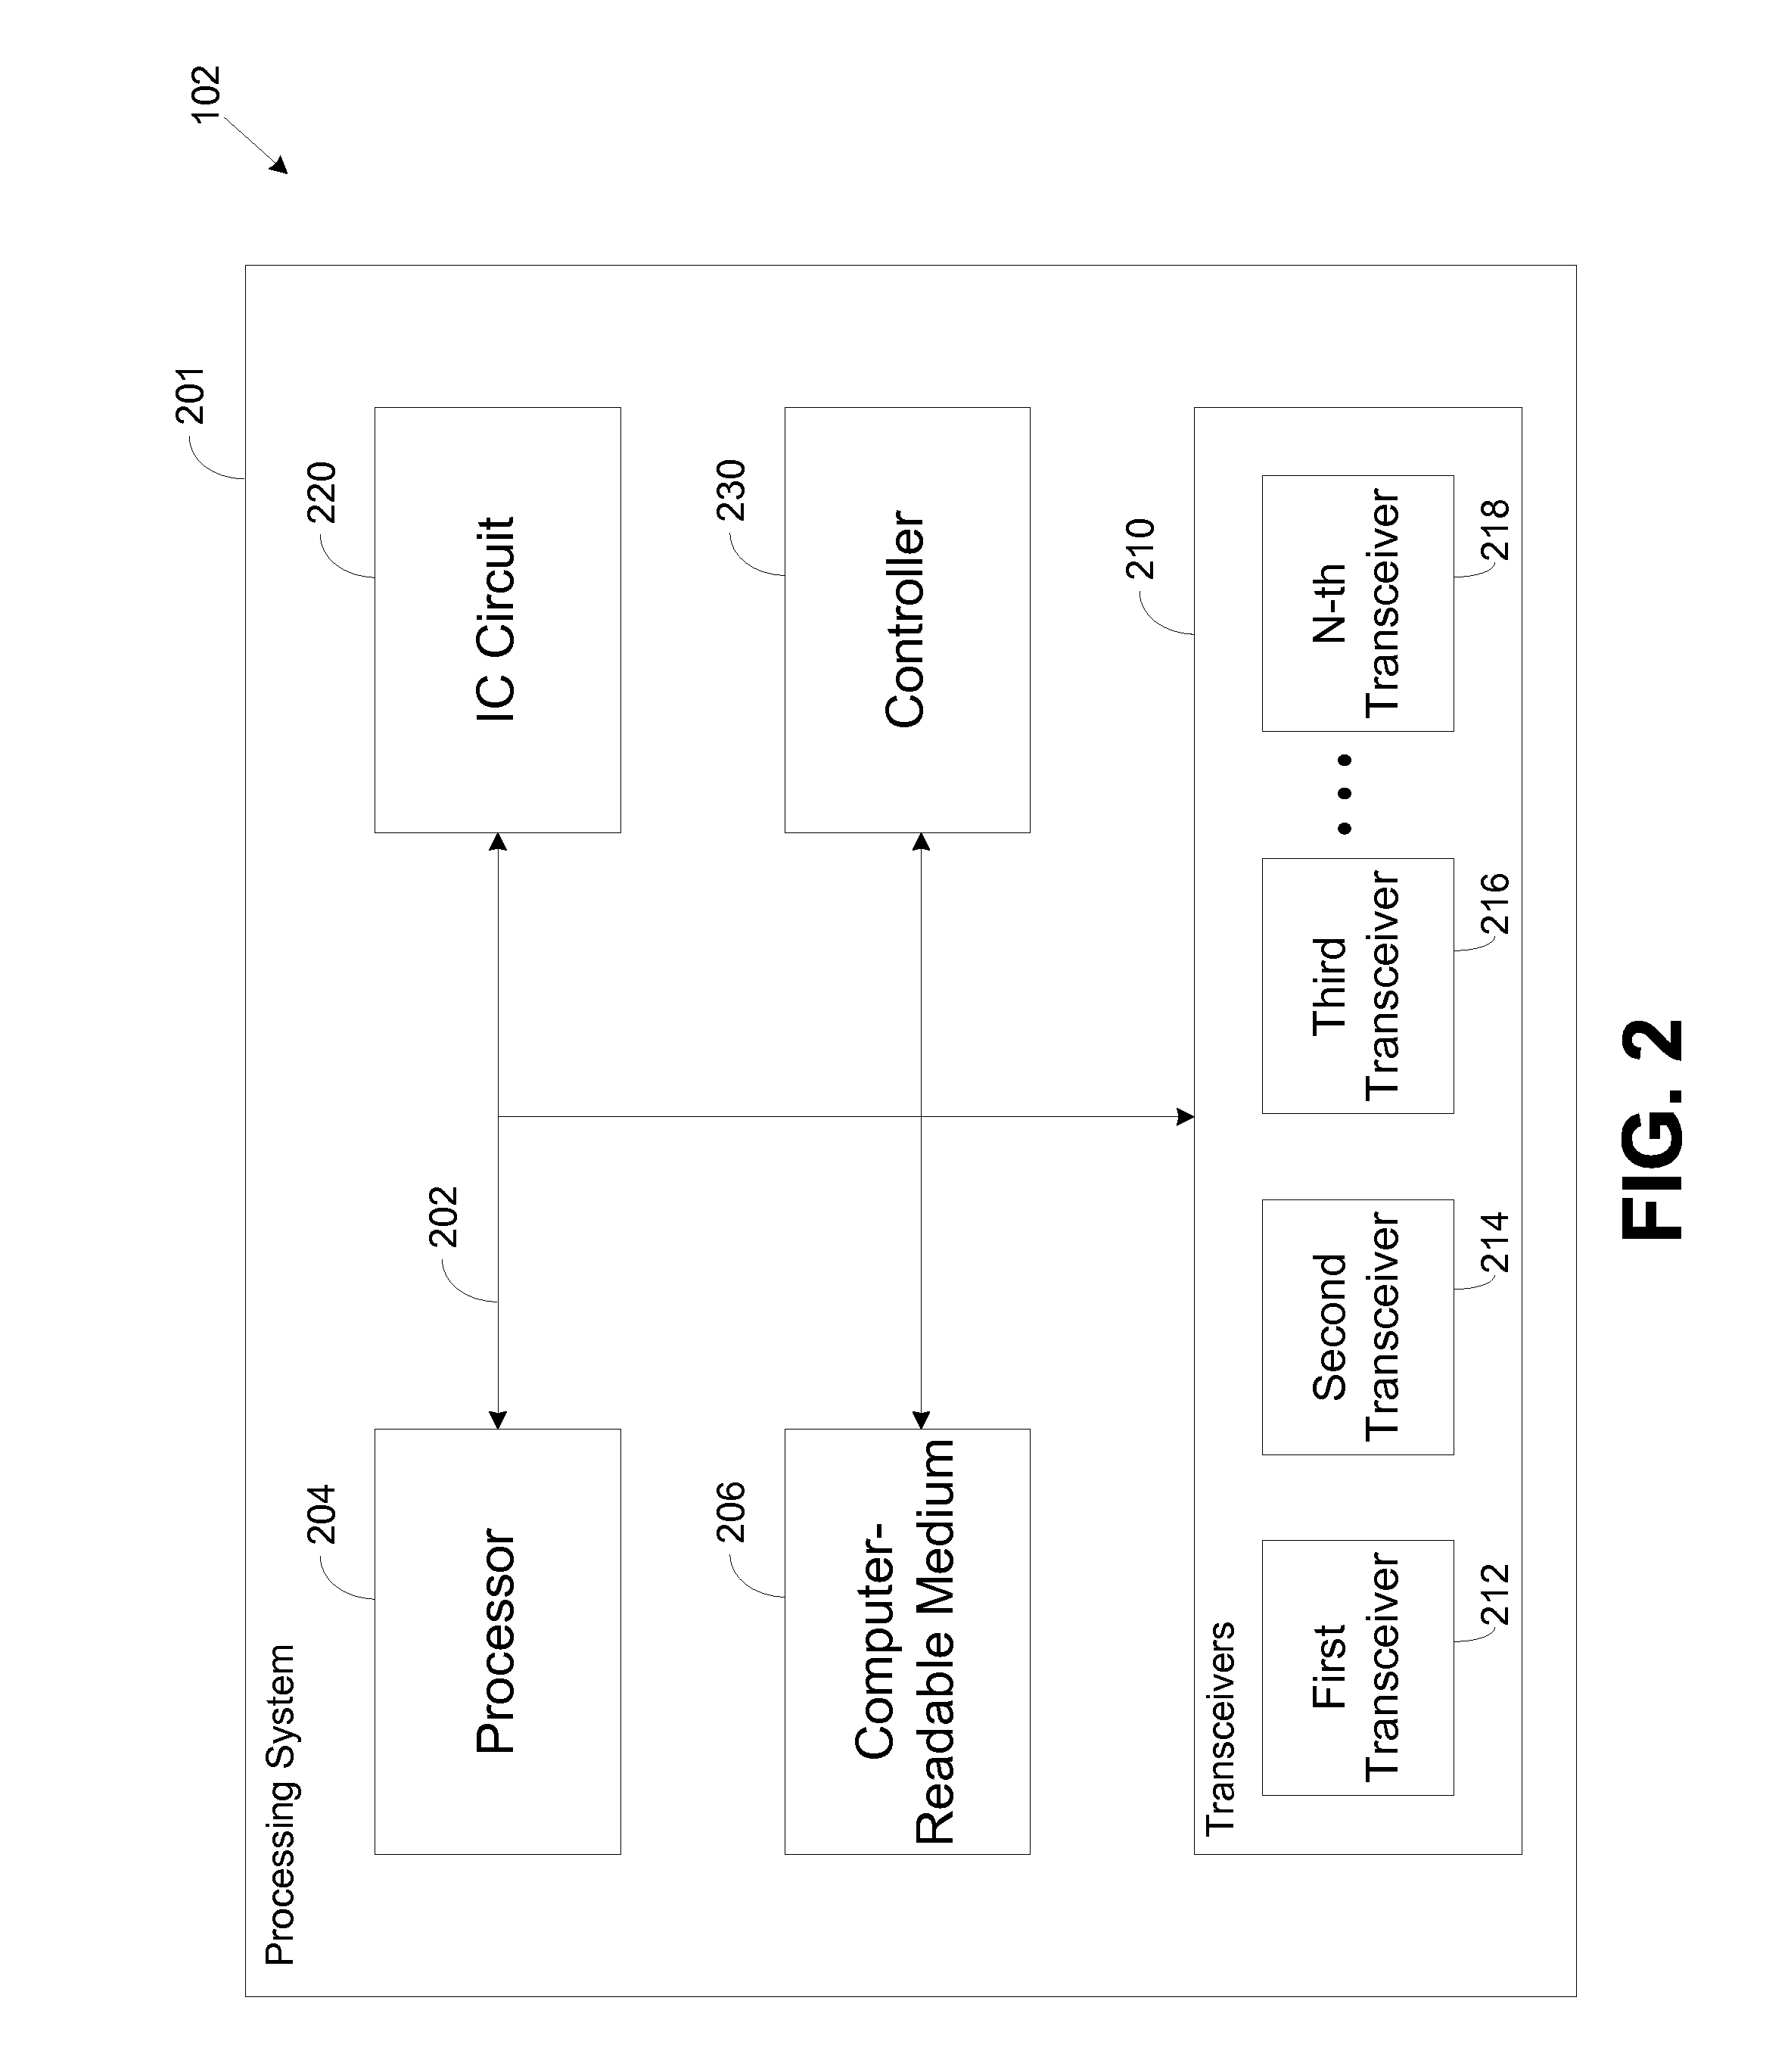 Active interference cancellation in analog domain